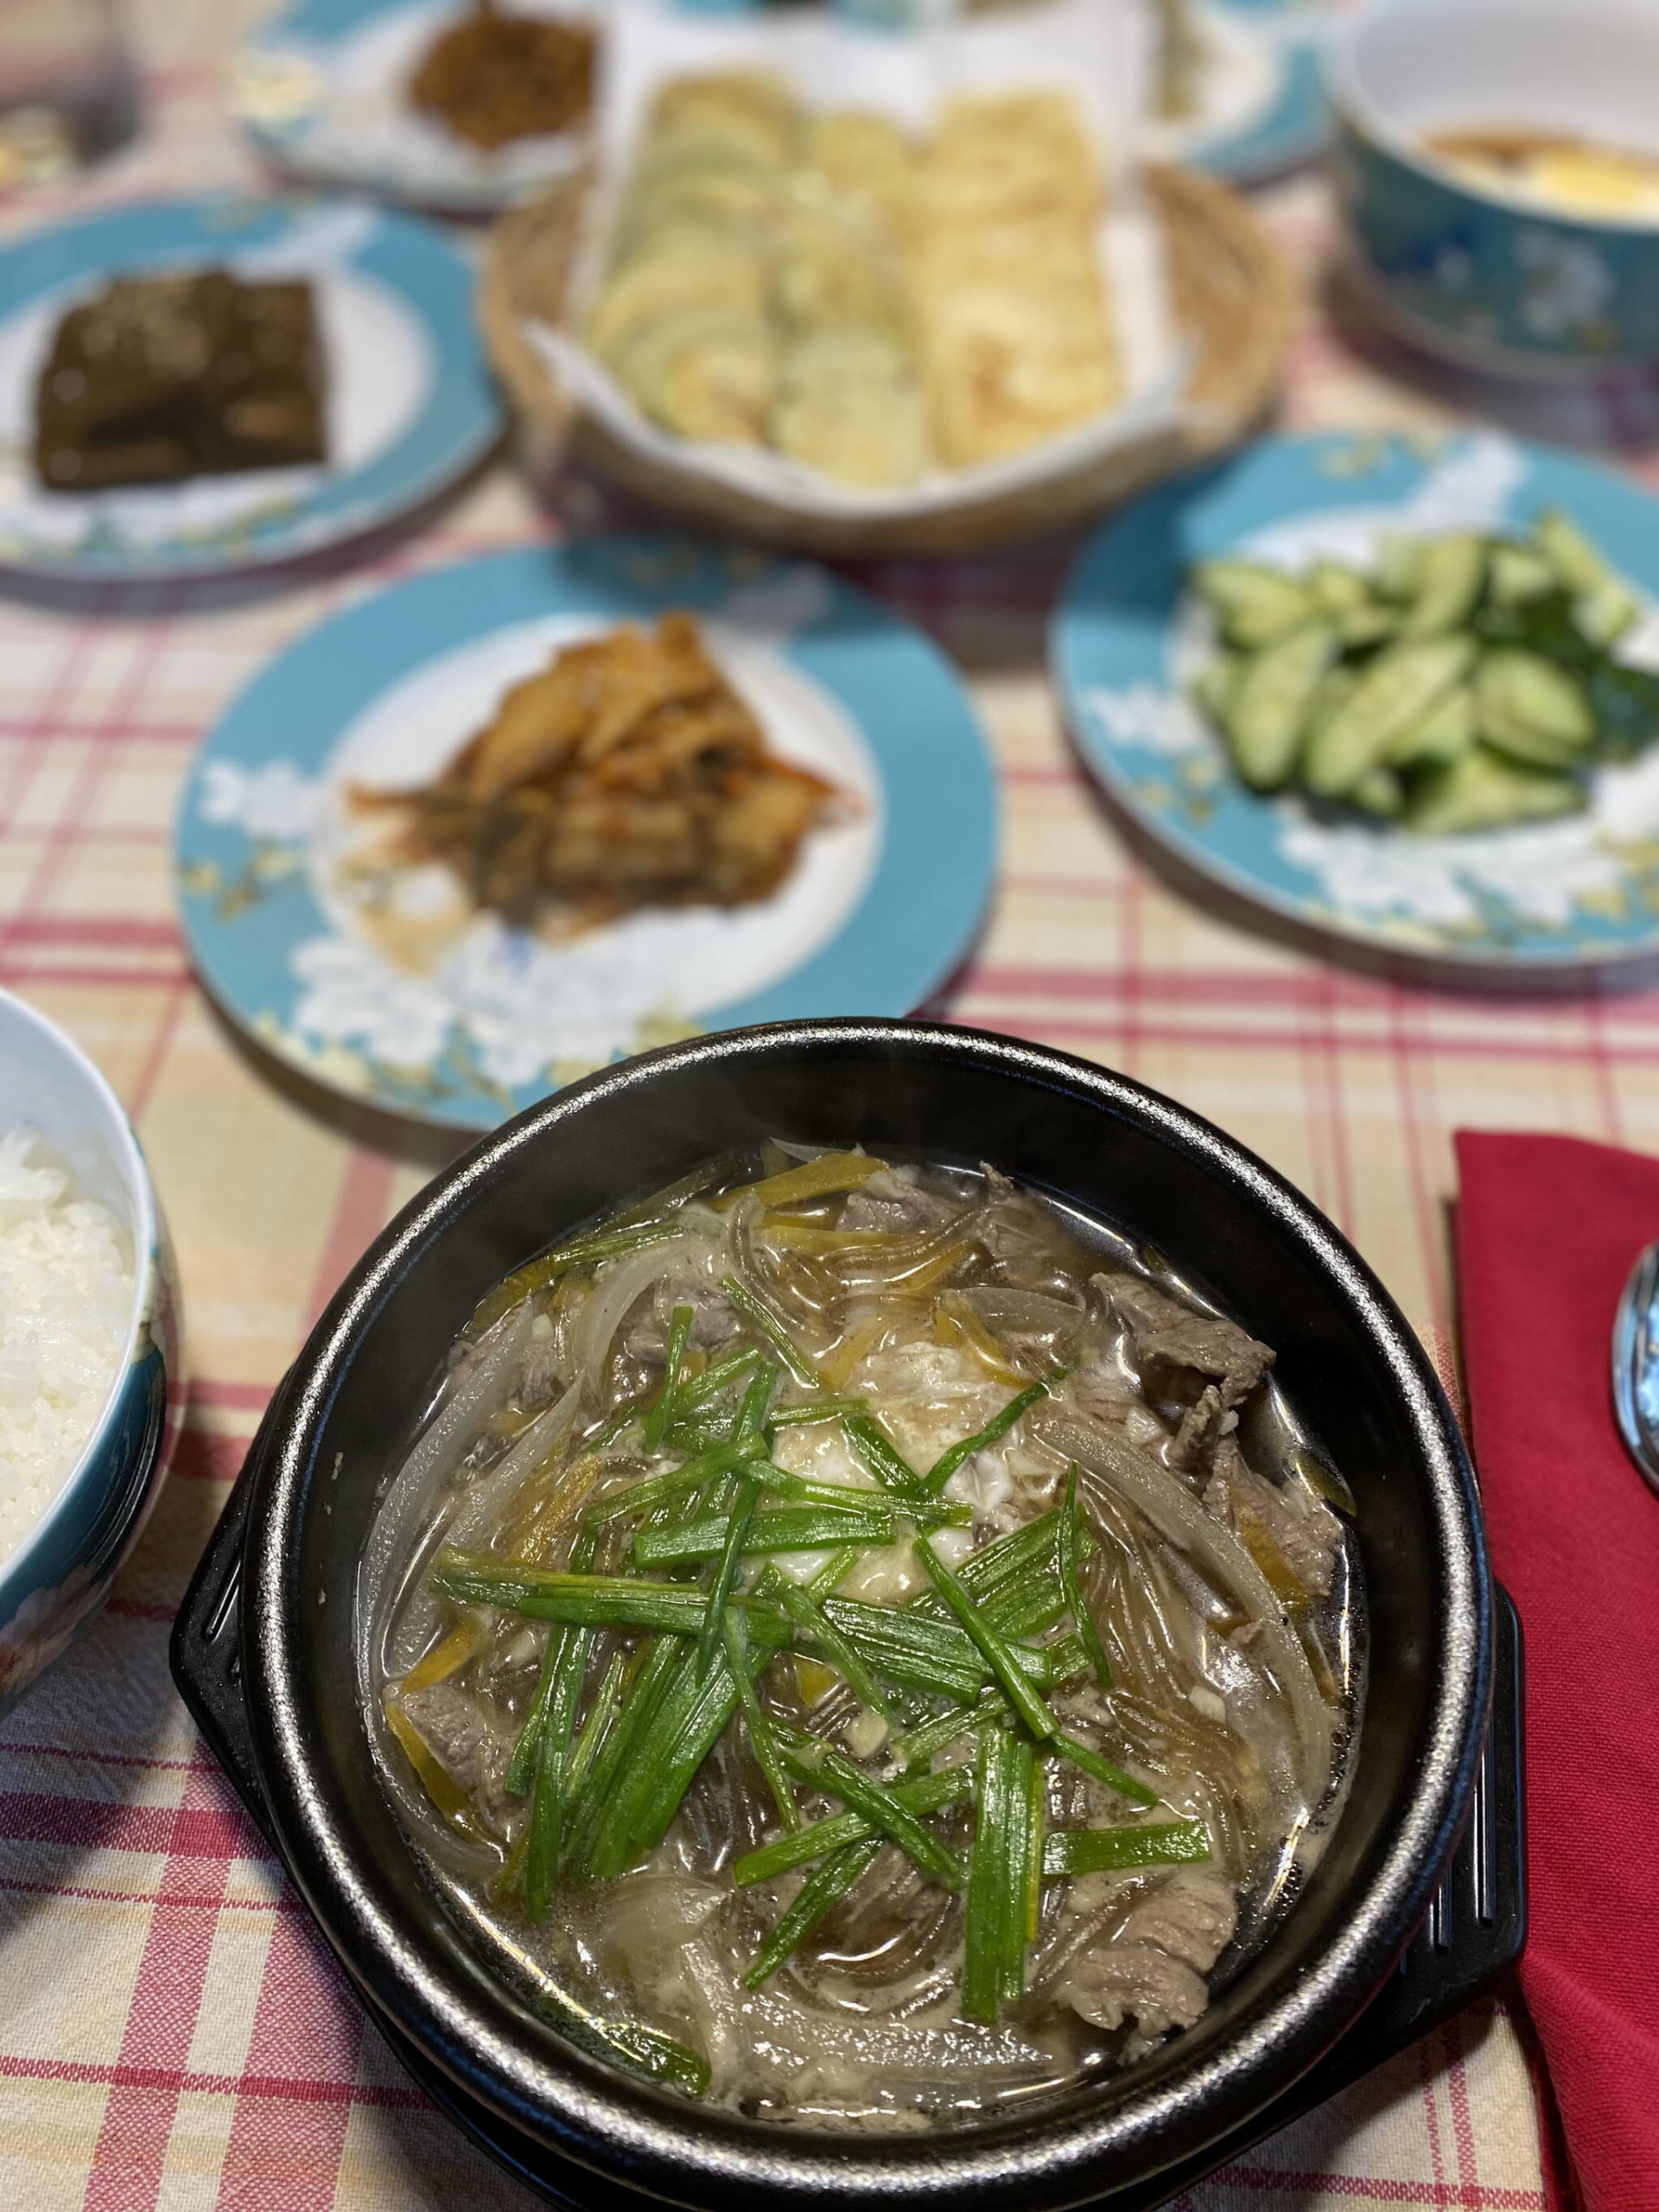 Bulkogi Stew, a mixture of beef steak, potato starch noodles, green onions and broth, is enjoyed as part of the Korean harvest festival, Chuseok. (Photo by Tressa Dale/Peninsula Clarion)